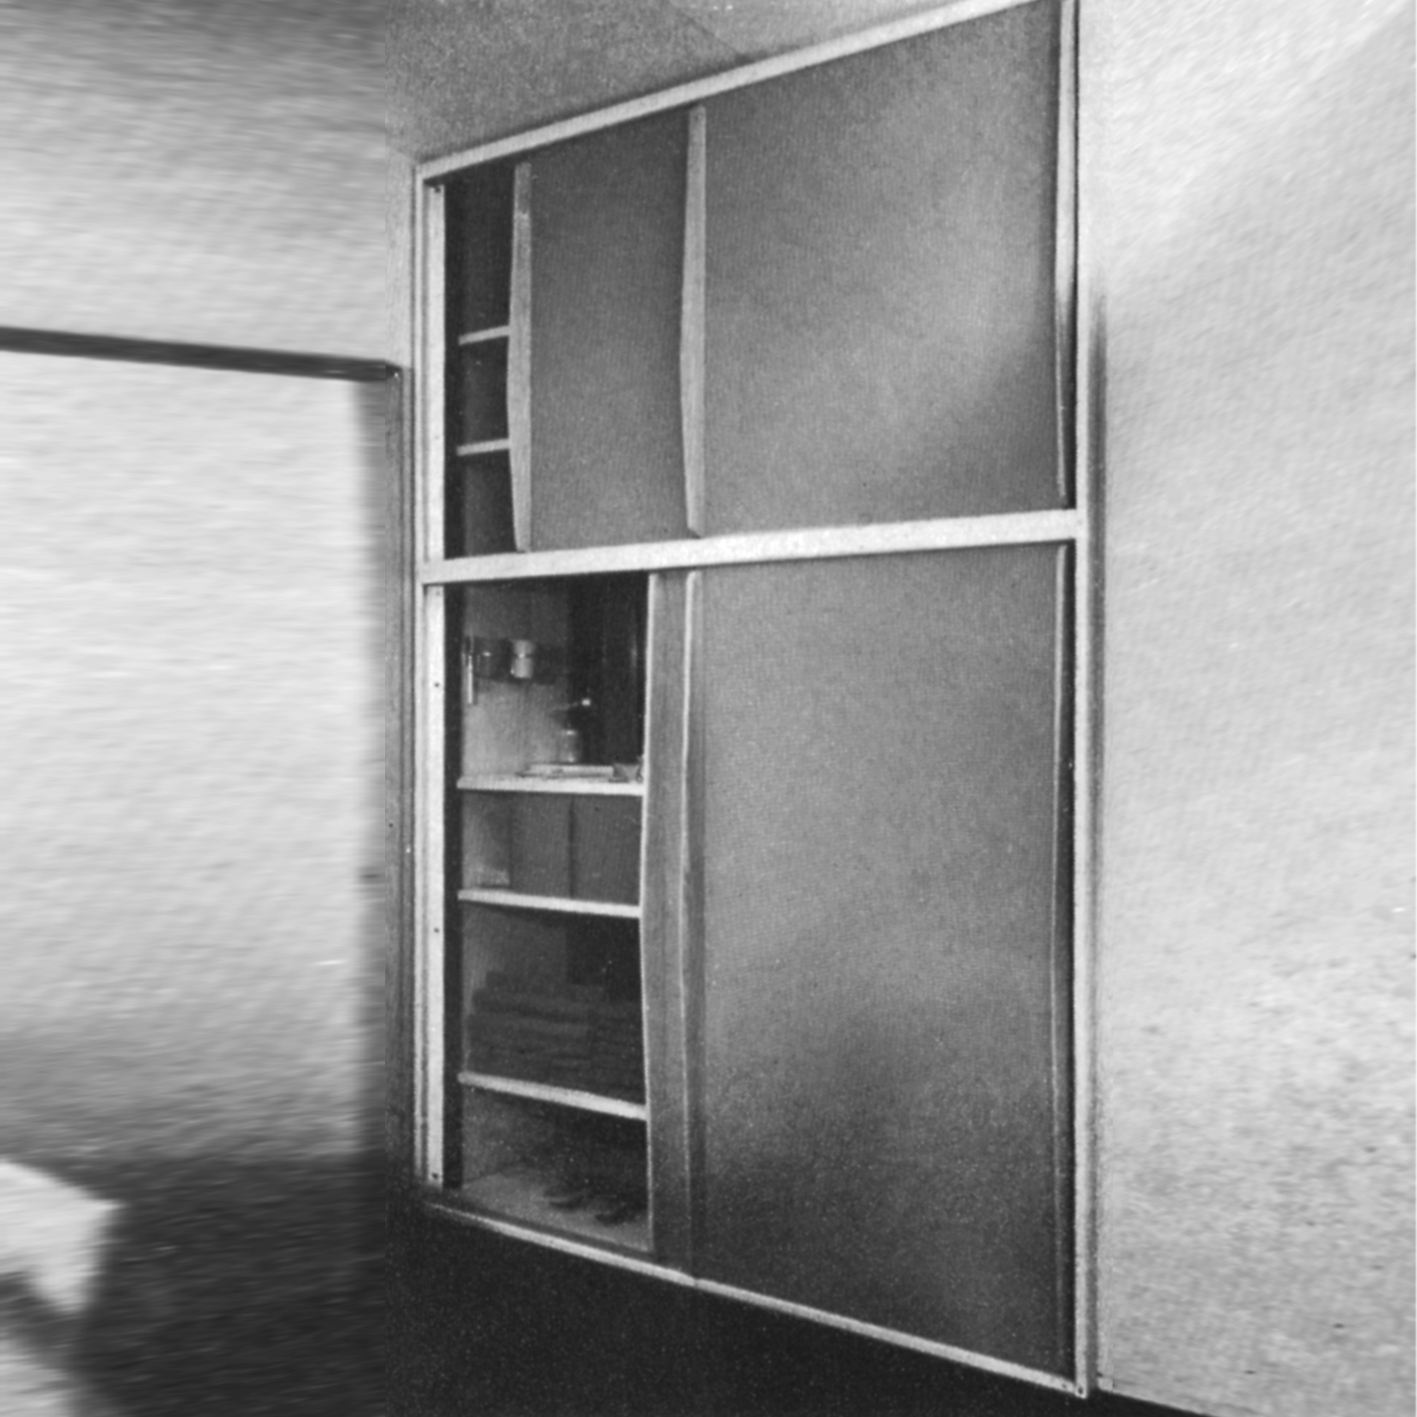 Brazza cupboard with Charlotte Perriand, 1952. Sheet steel, aluminum sheet “diamond point” motif and wood handles. Provenance: Air France building, Brazzaville.